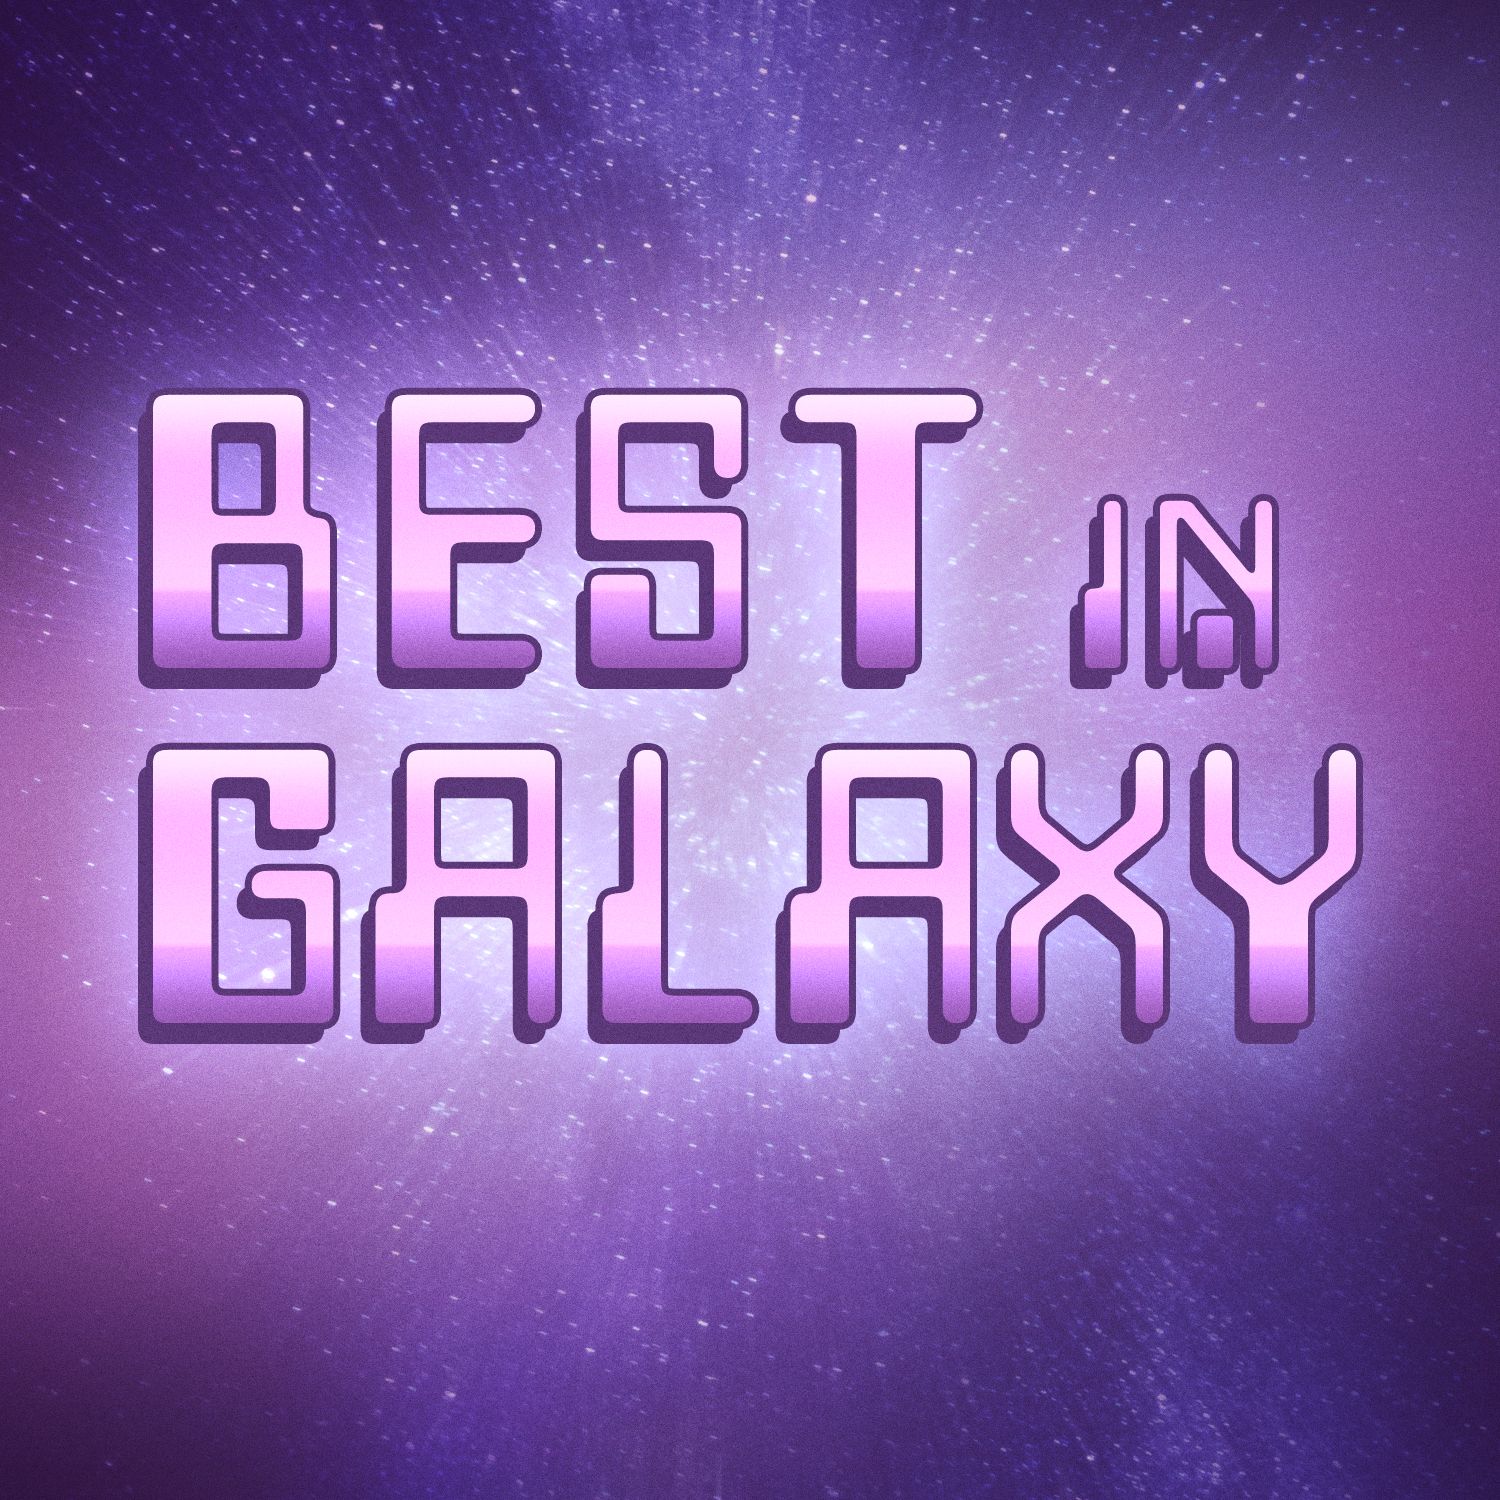 "Best In Galaxy" Podcast